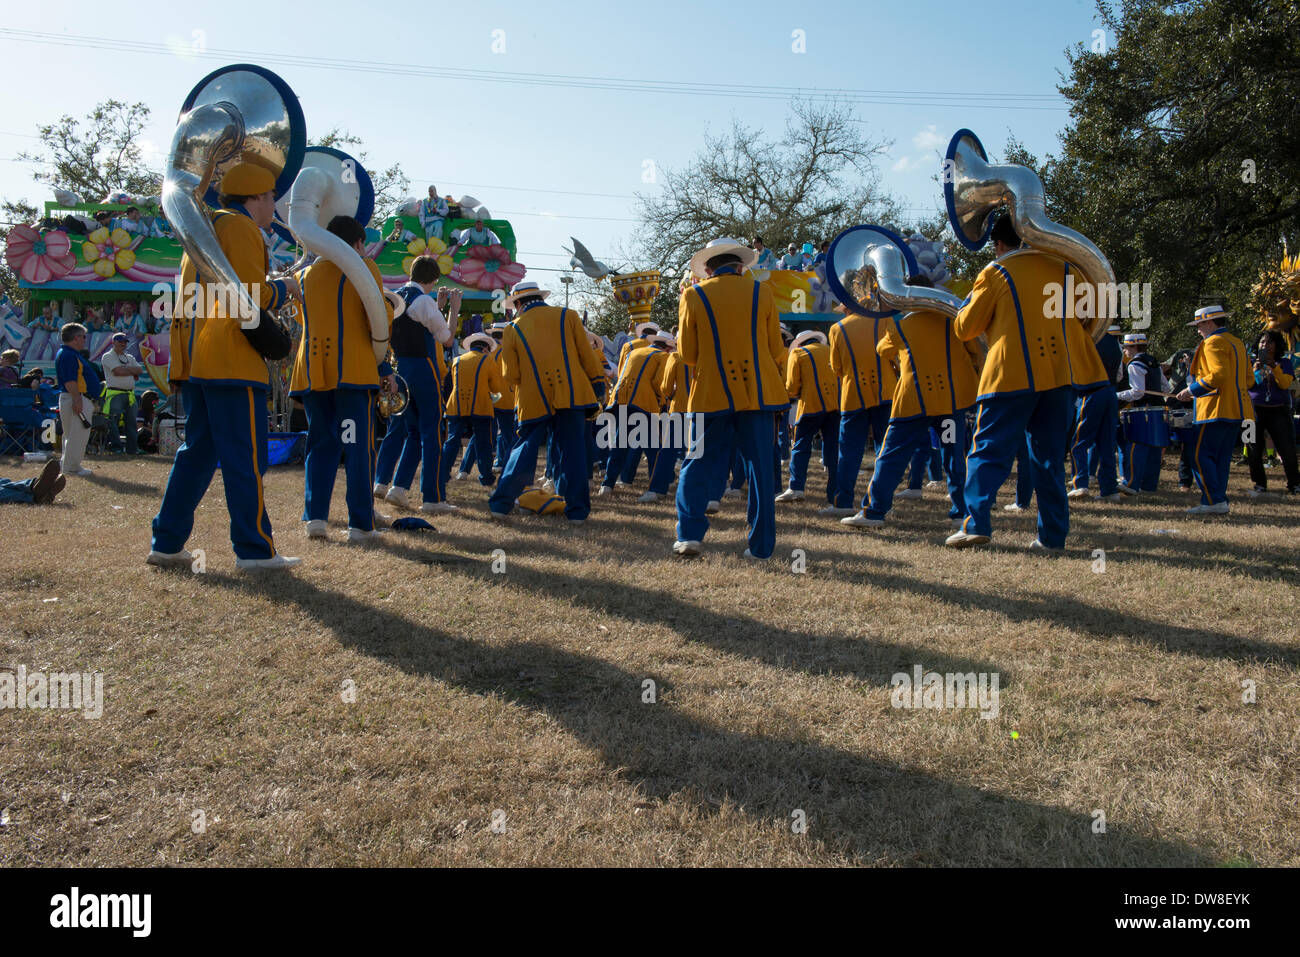 New Orleans, USA. 1st Mar, 2014. Mardi Gras Krewe of Endymion prepares to begin the Saturday parade in the Lakeview/mid-city staging area of New Orleans, Louisiana, U.S.A. on 1 March, 2014. Credit:  JT Blatty/Alamy Live News Stock Photo